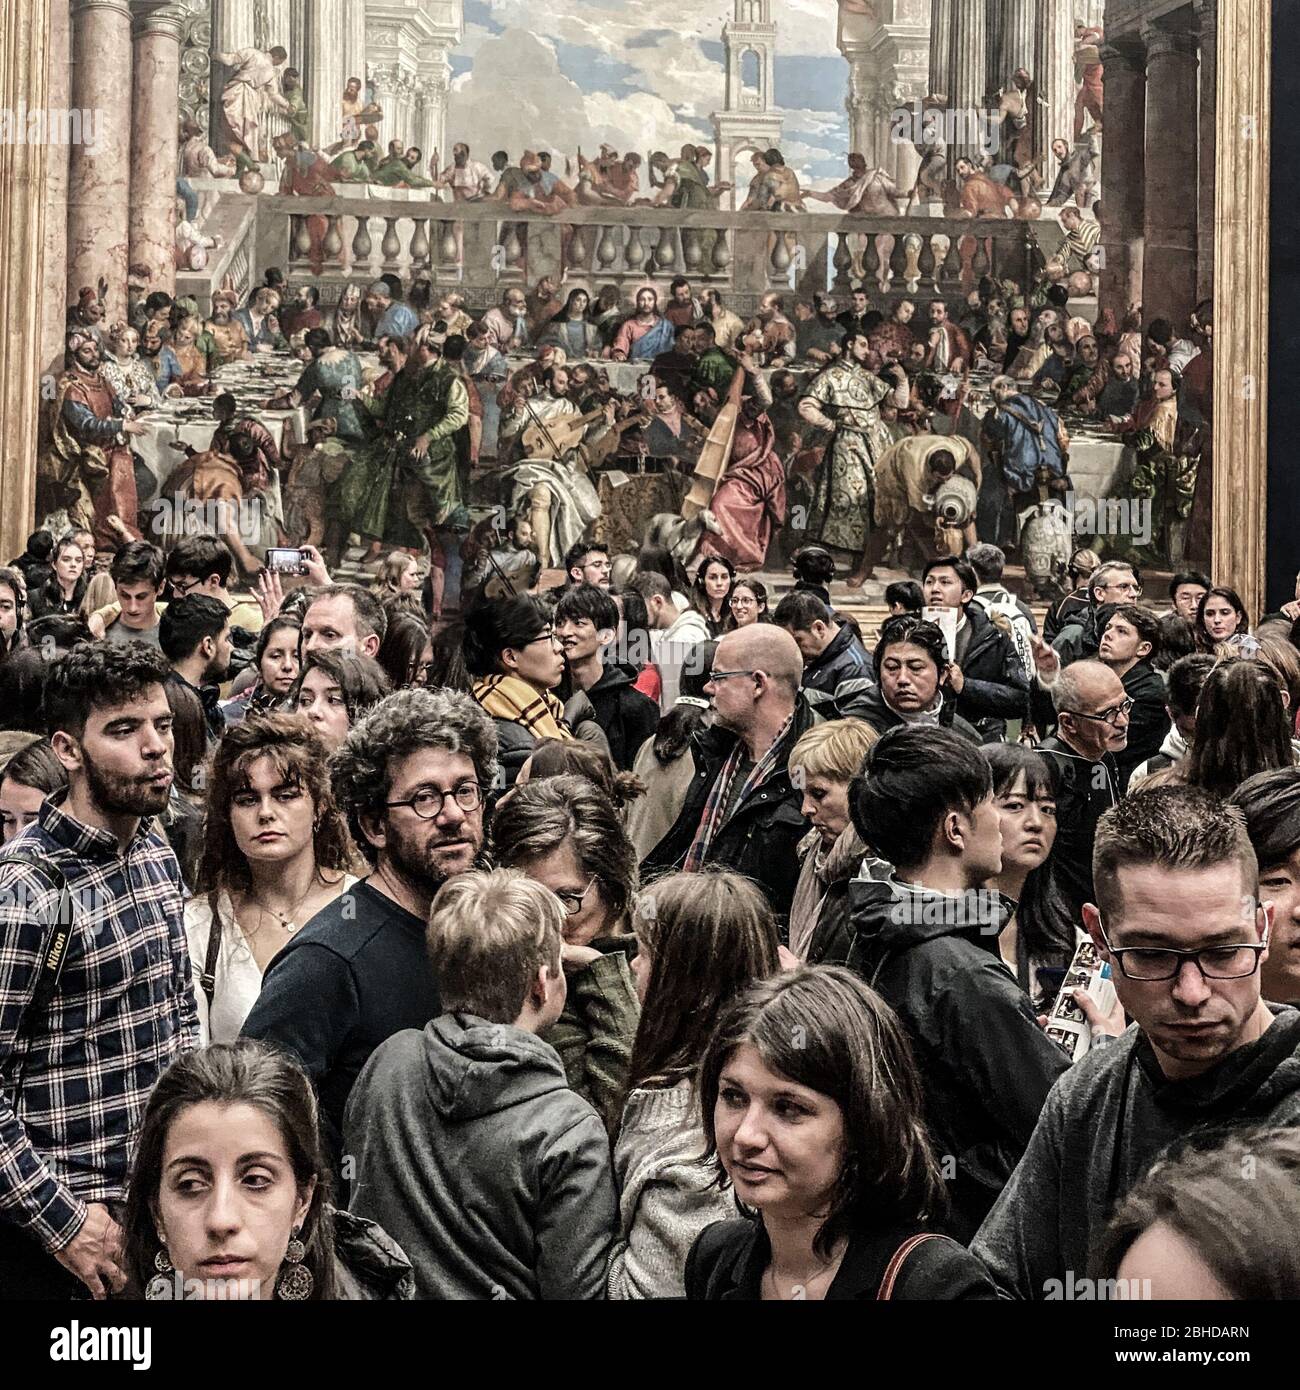 Pais, France, Febuary 21, 2020,  Dense crowd of tourists in the Louvre museum, in front of 'Les noces de Cana' . Large number of unidentified people Stock Photo